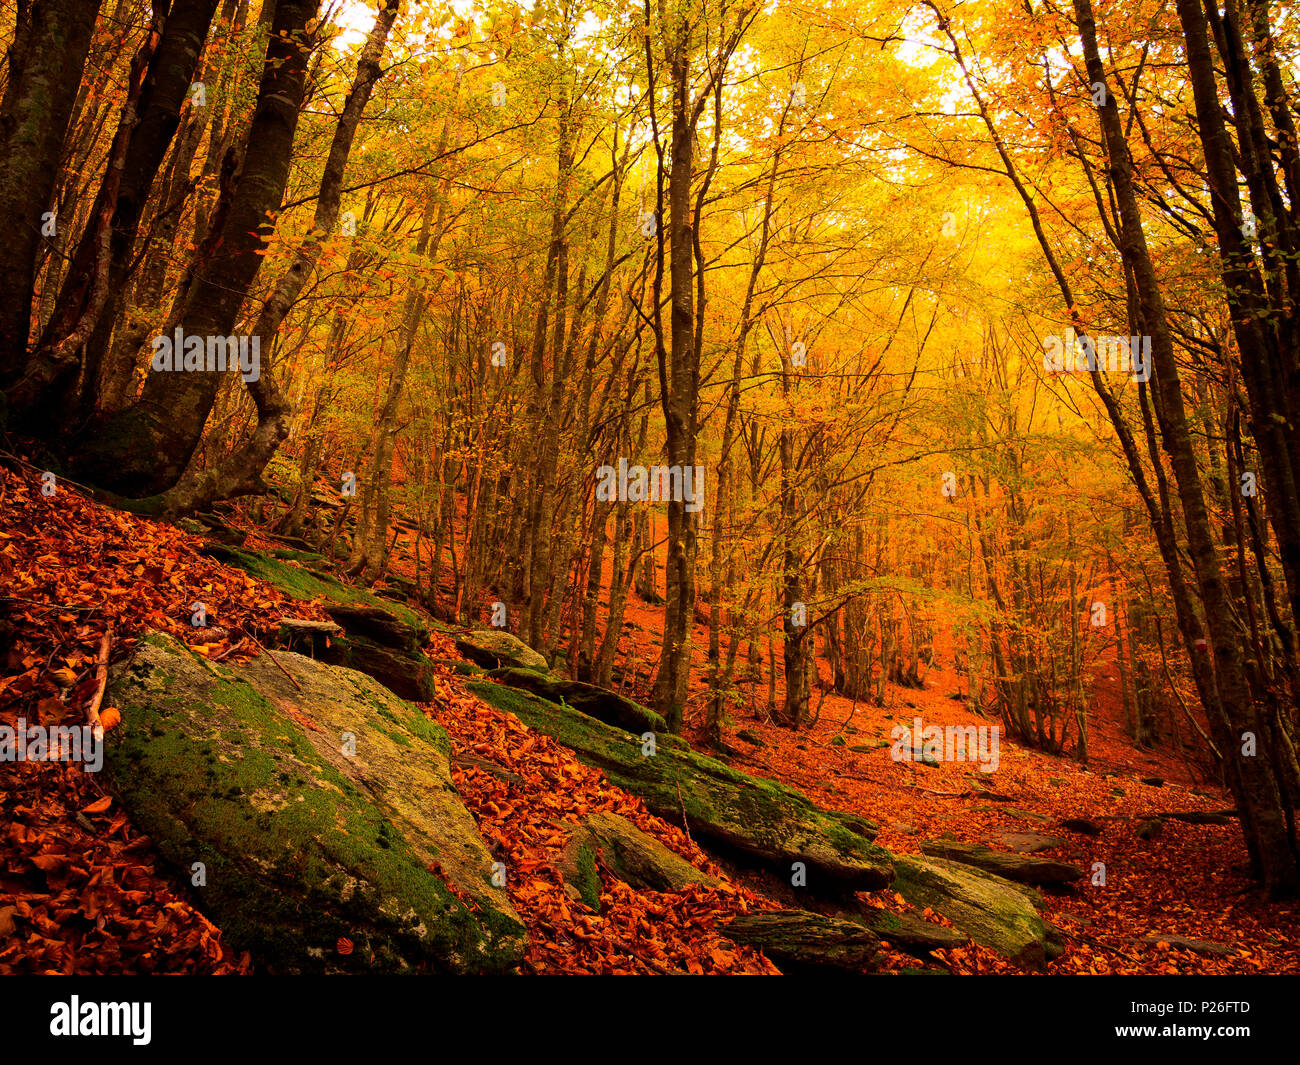 Autumn forest, Apuan alps, Versilia, Lucca province, Tuscany, Italy, Europe Stock Photo